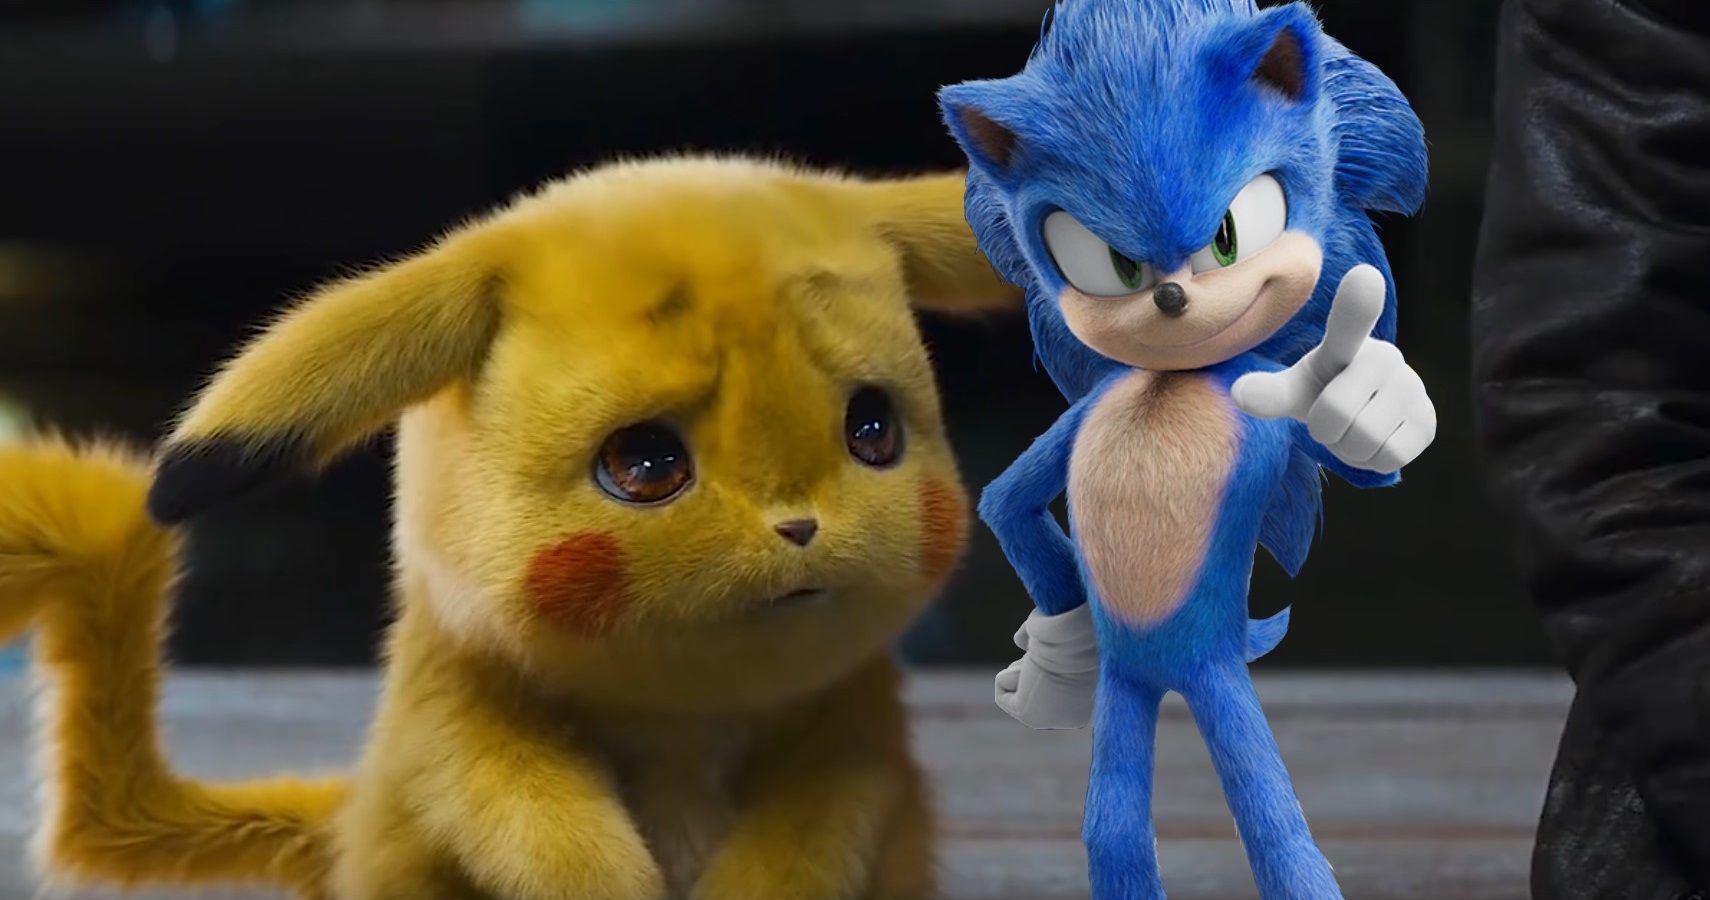 Sonic Dashes Past Detective Pikachu As The Highest Grossing Video Game Film In The US